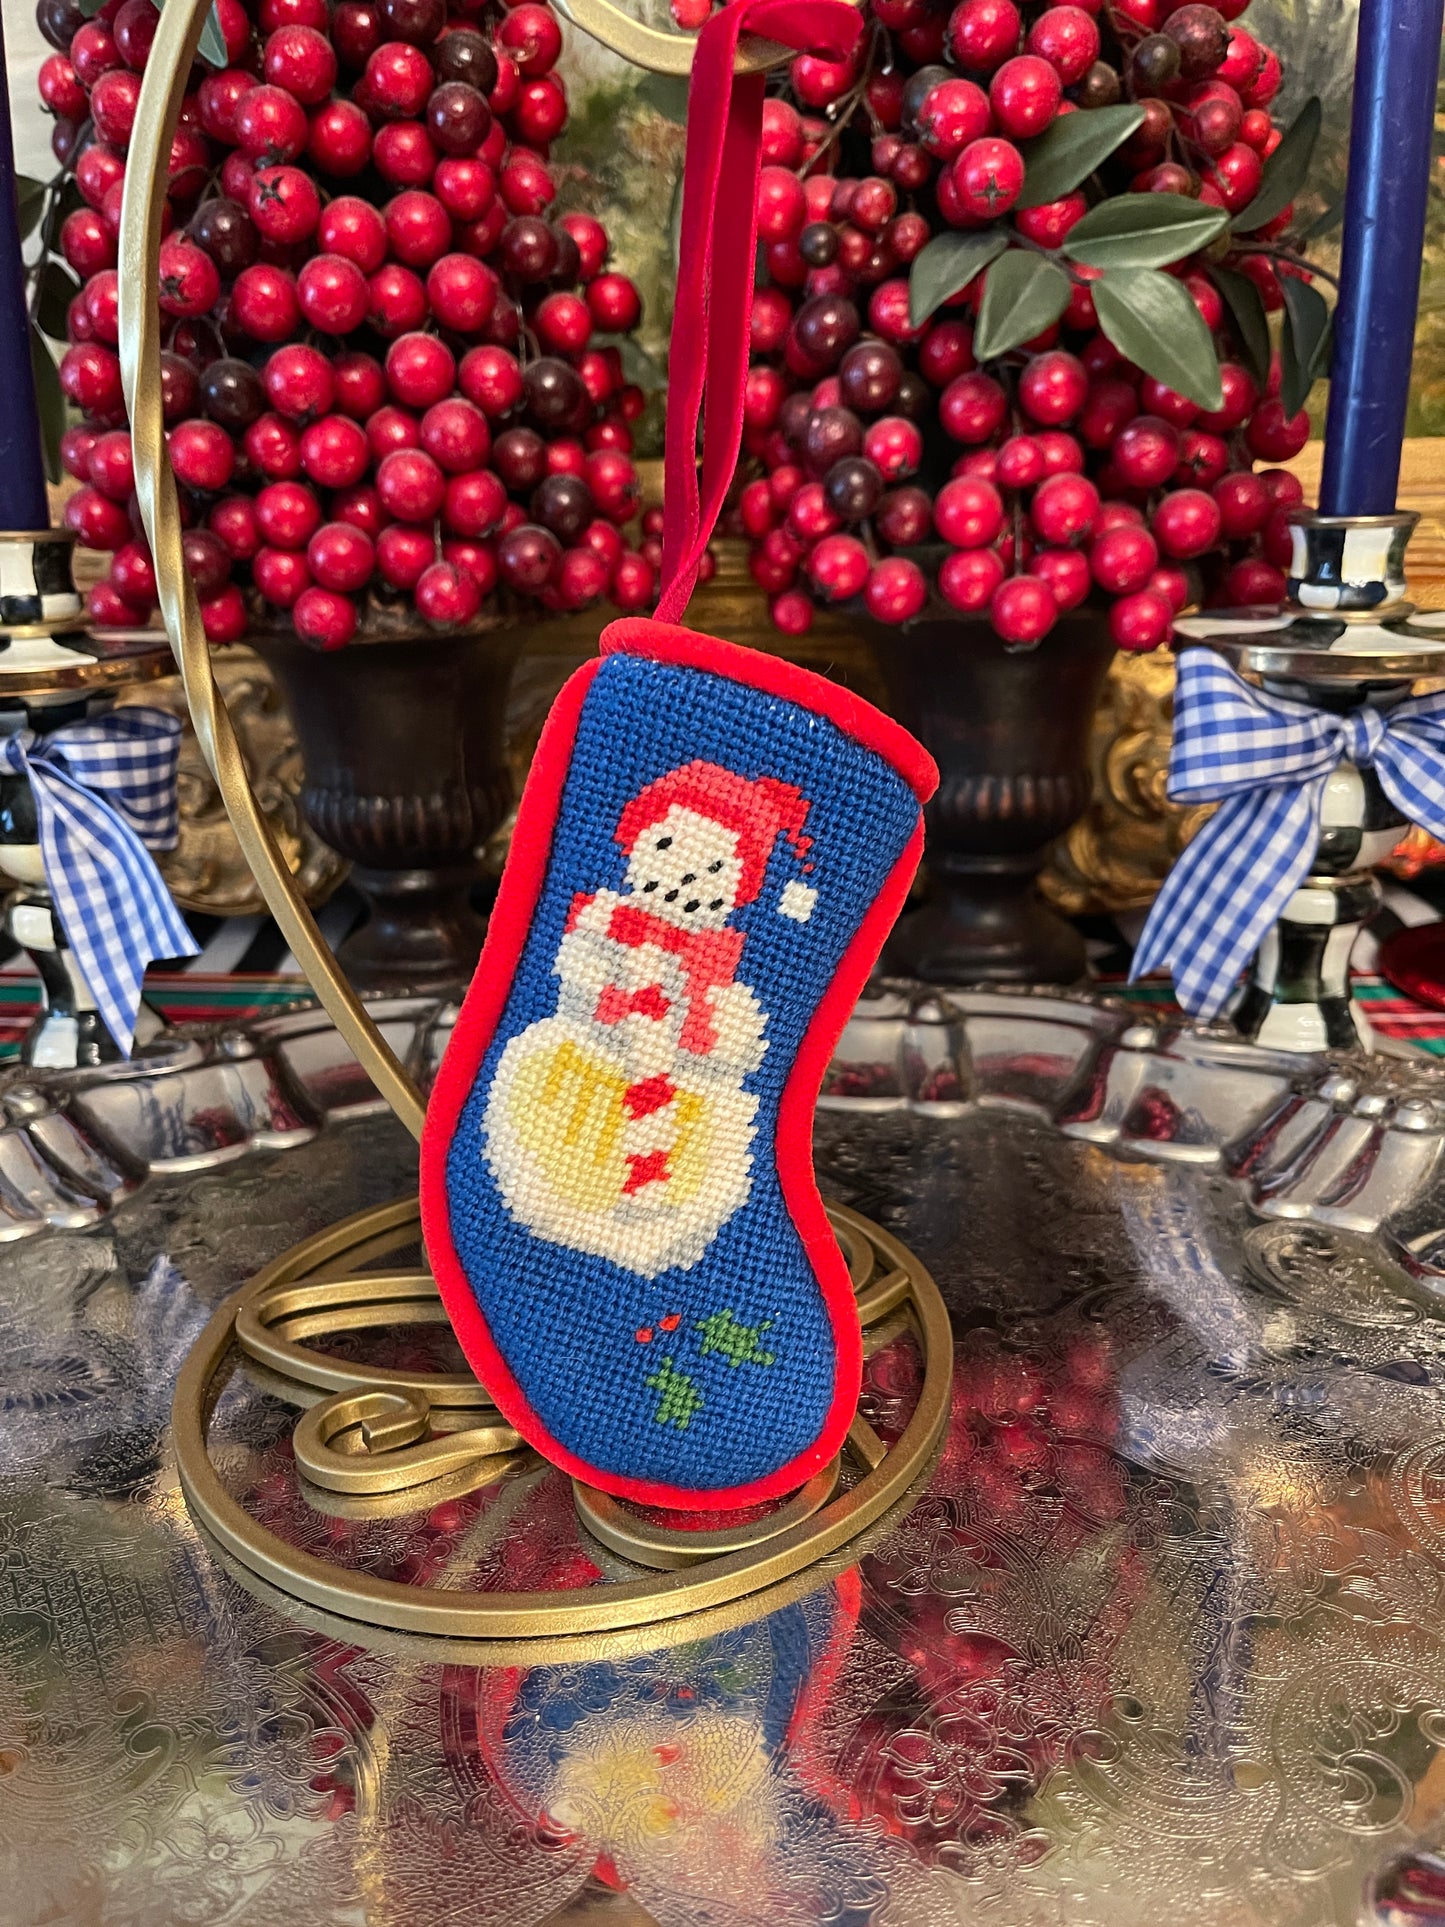 Vintage Needlepoint Snowman with Red Stocking Cap Christmas Ornament